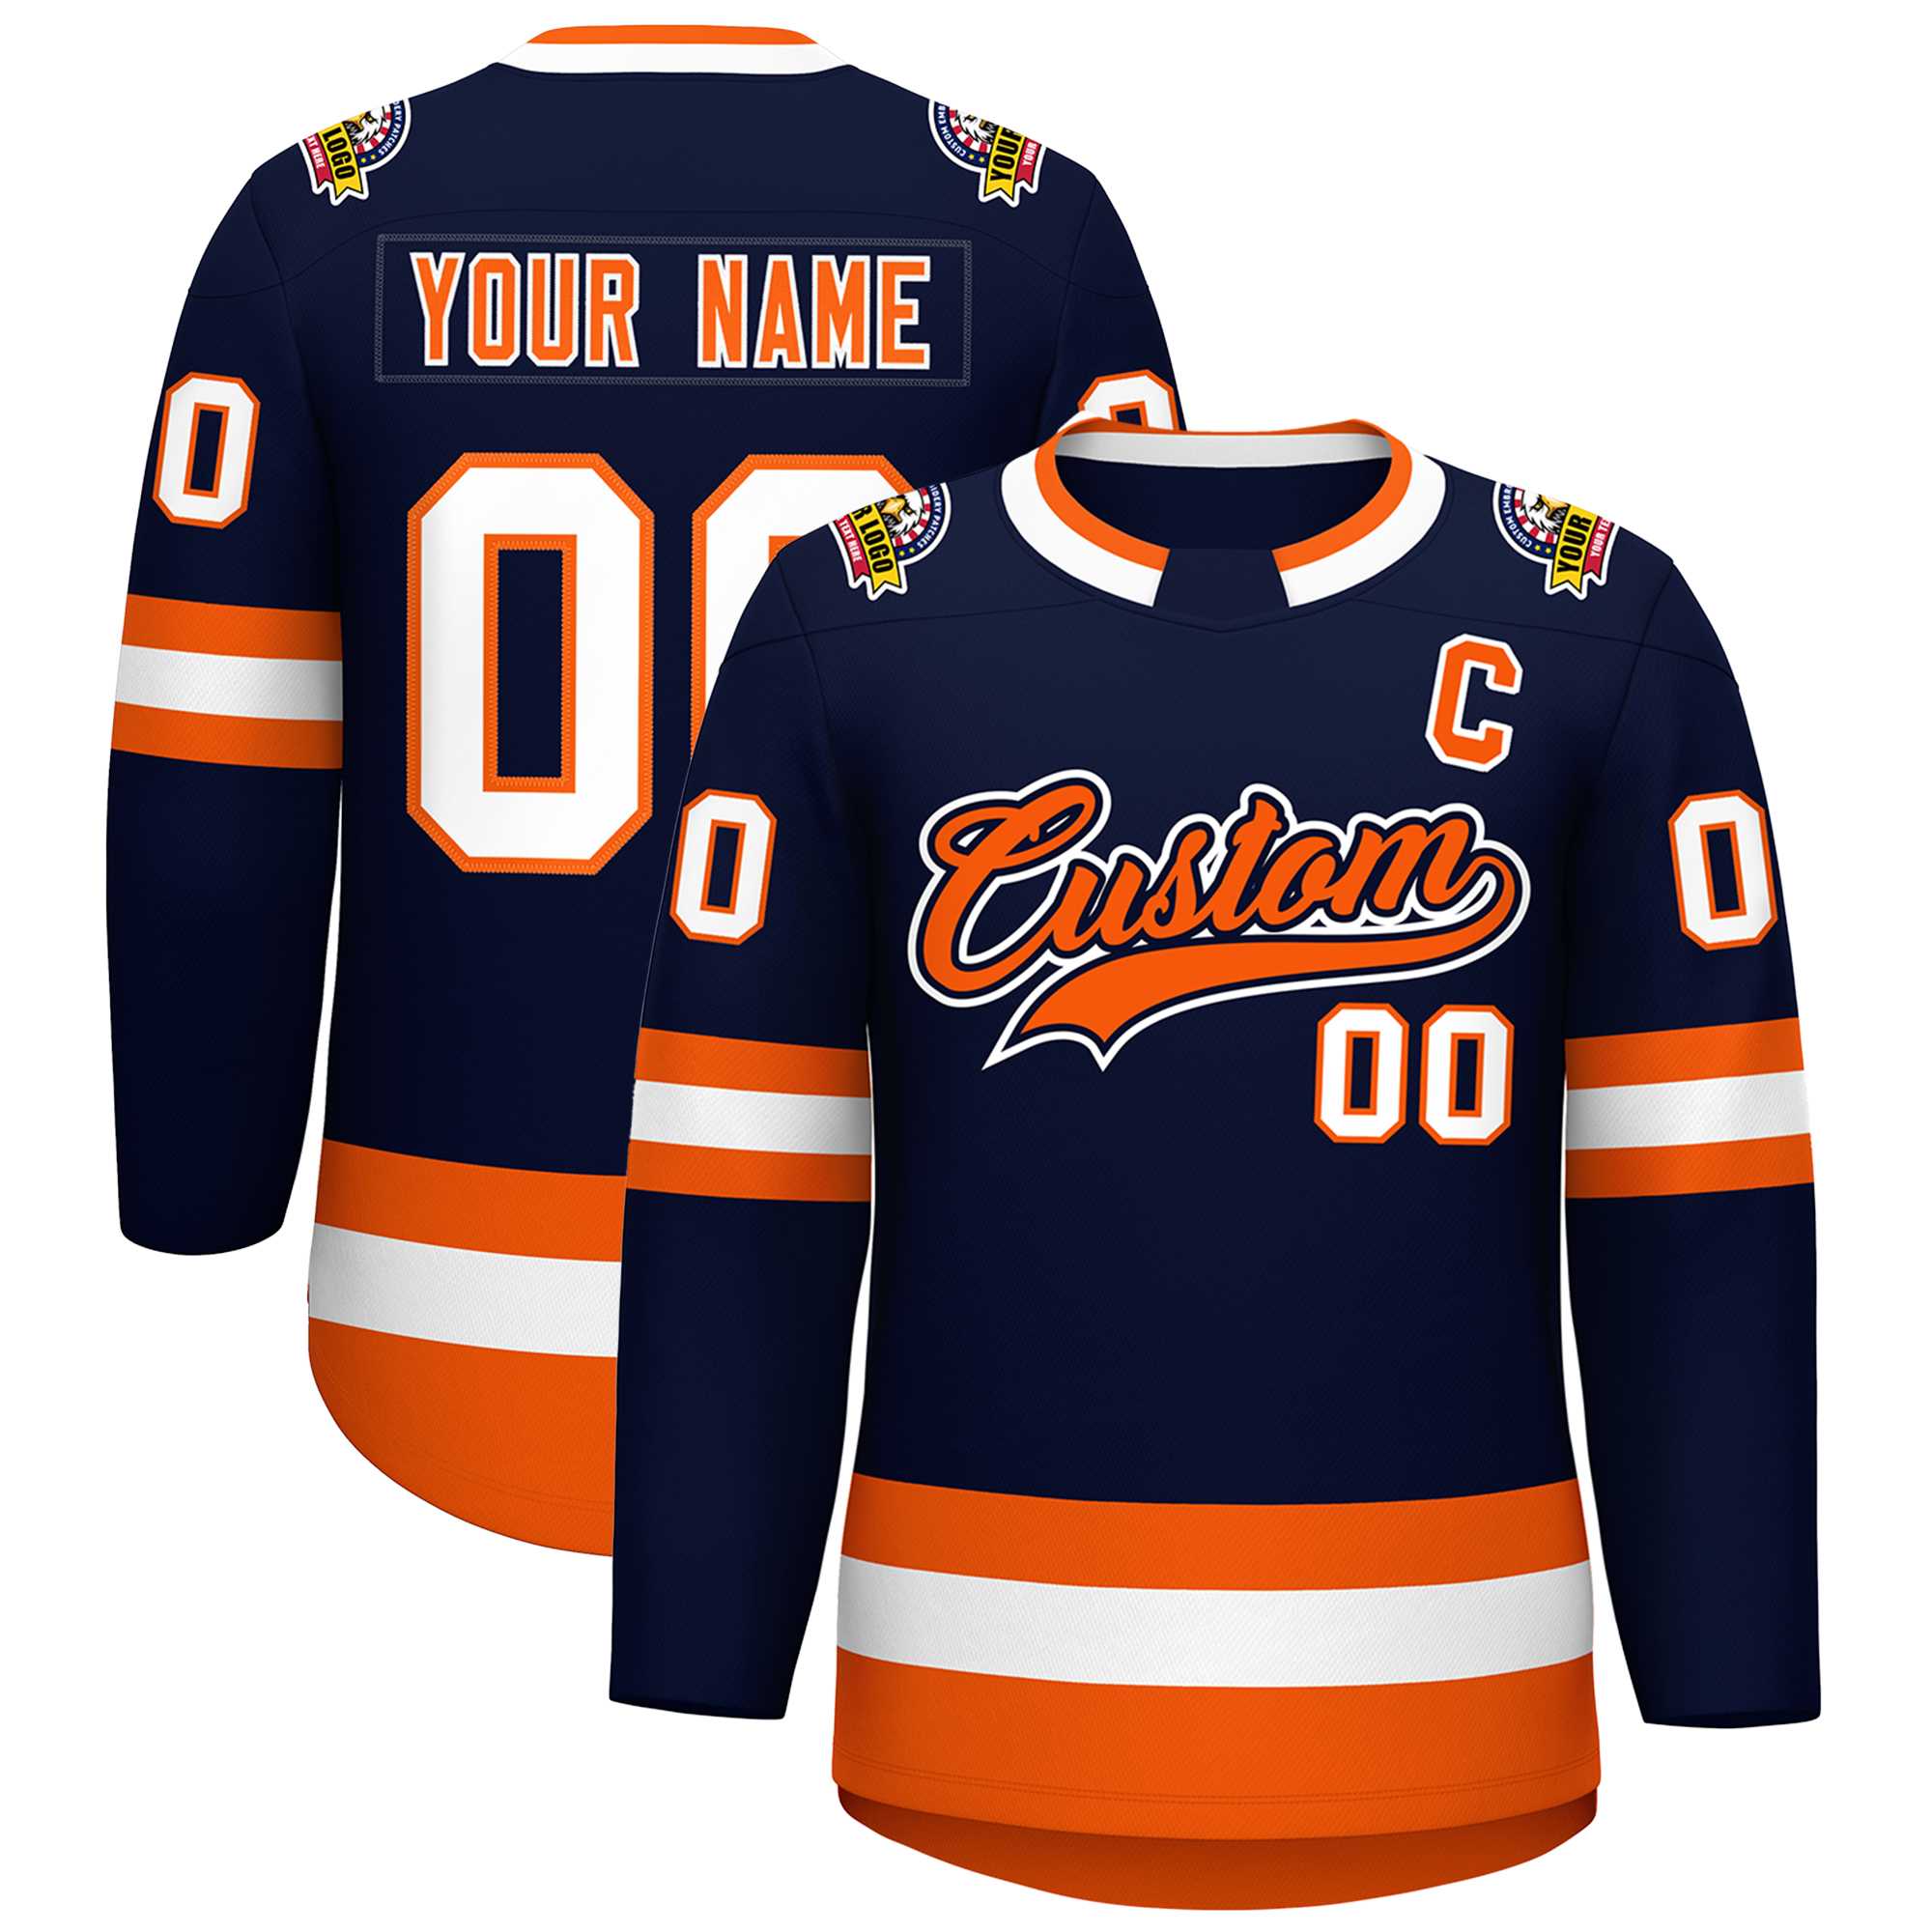 Source Wholesale new custom number fashion ice hockey jerseys high quality  custom logo printing manufacture for men hockey jersey on m.